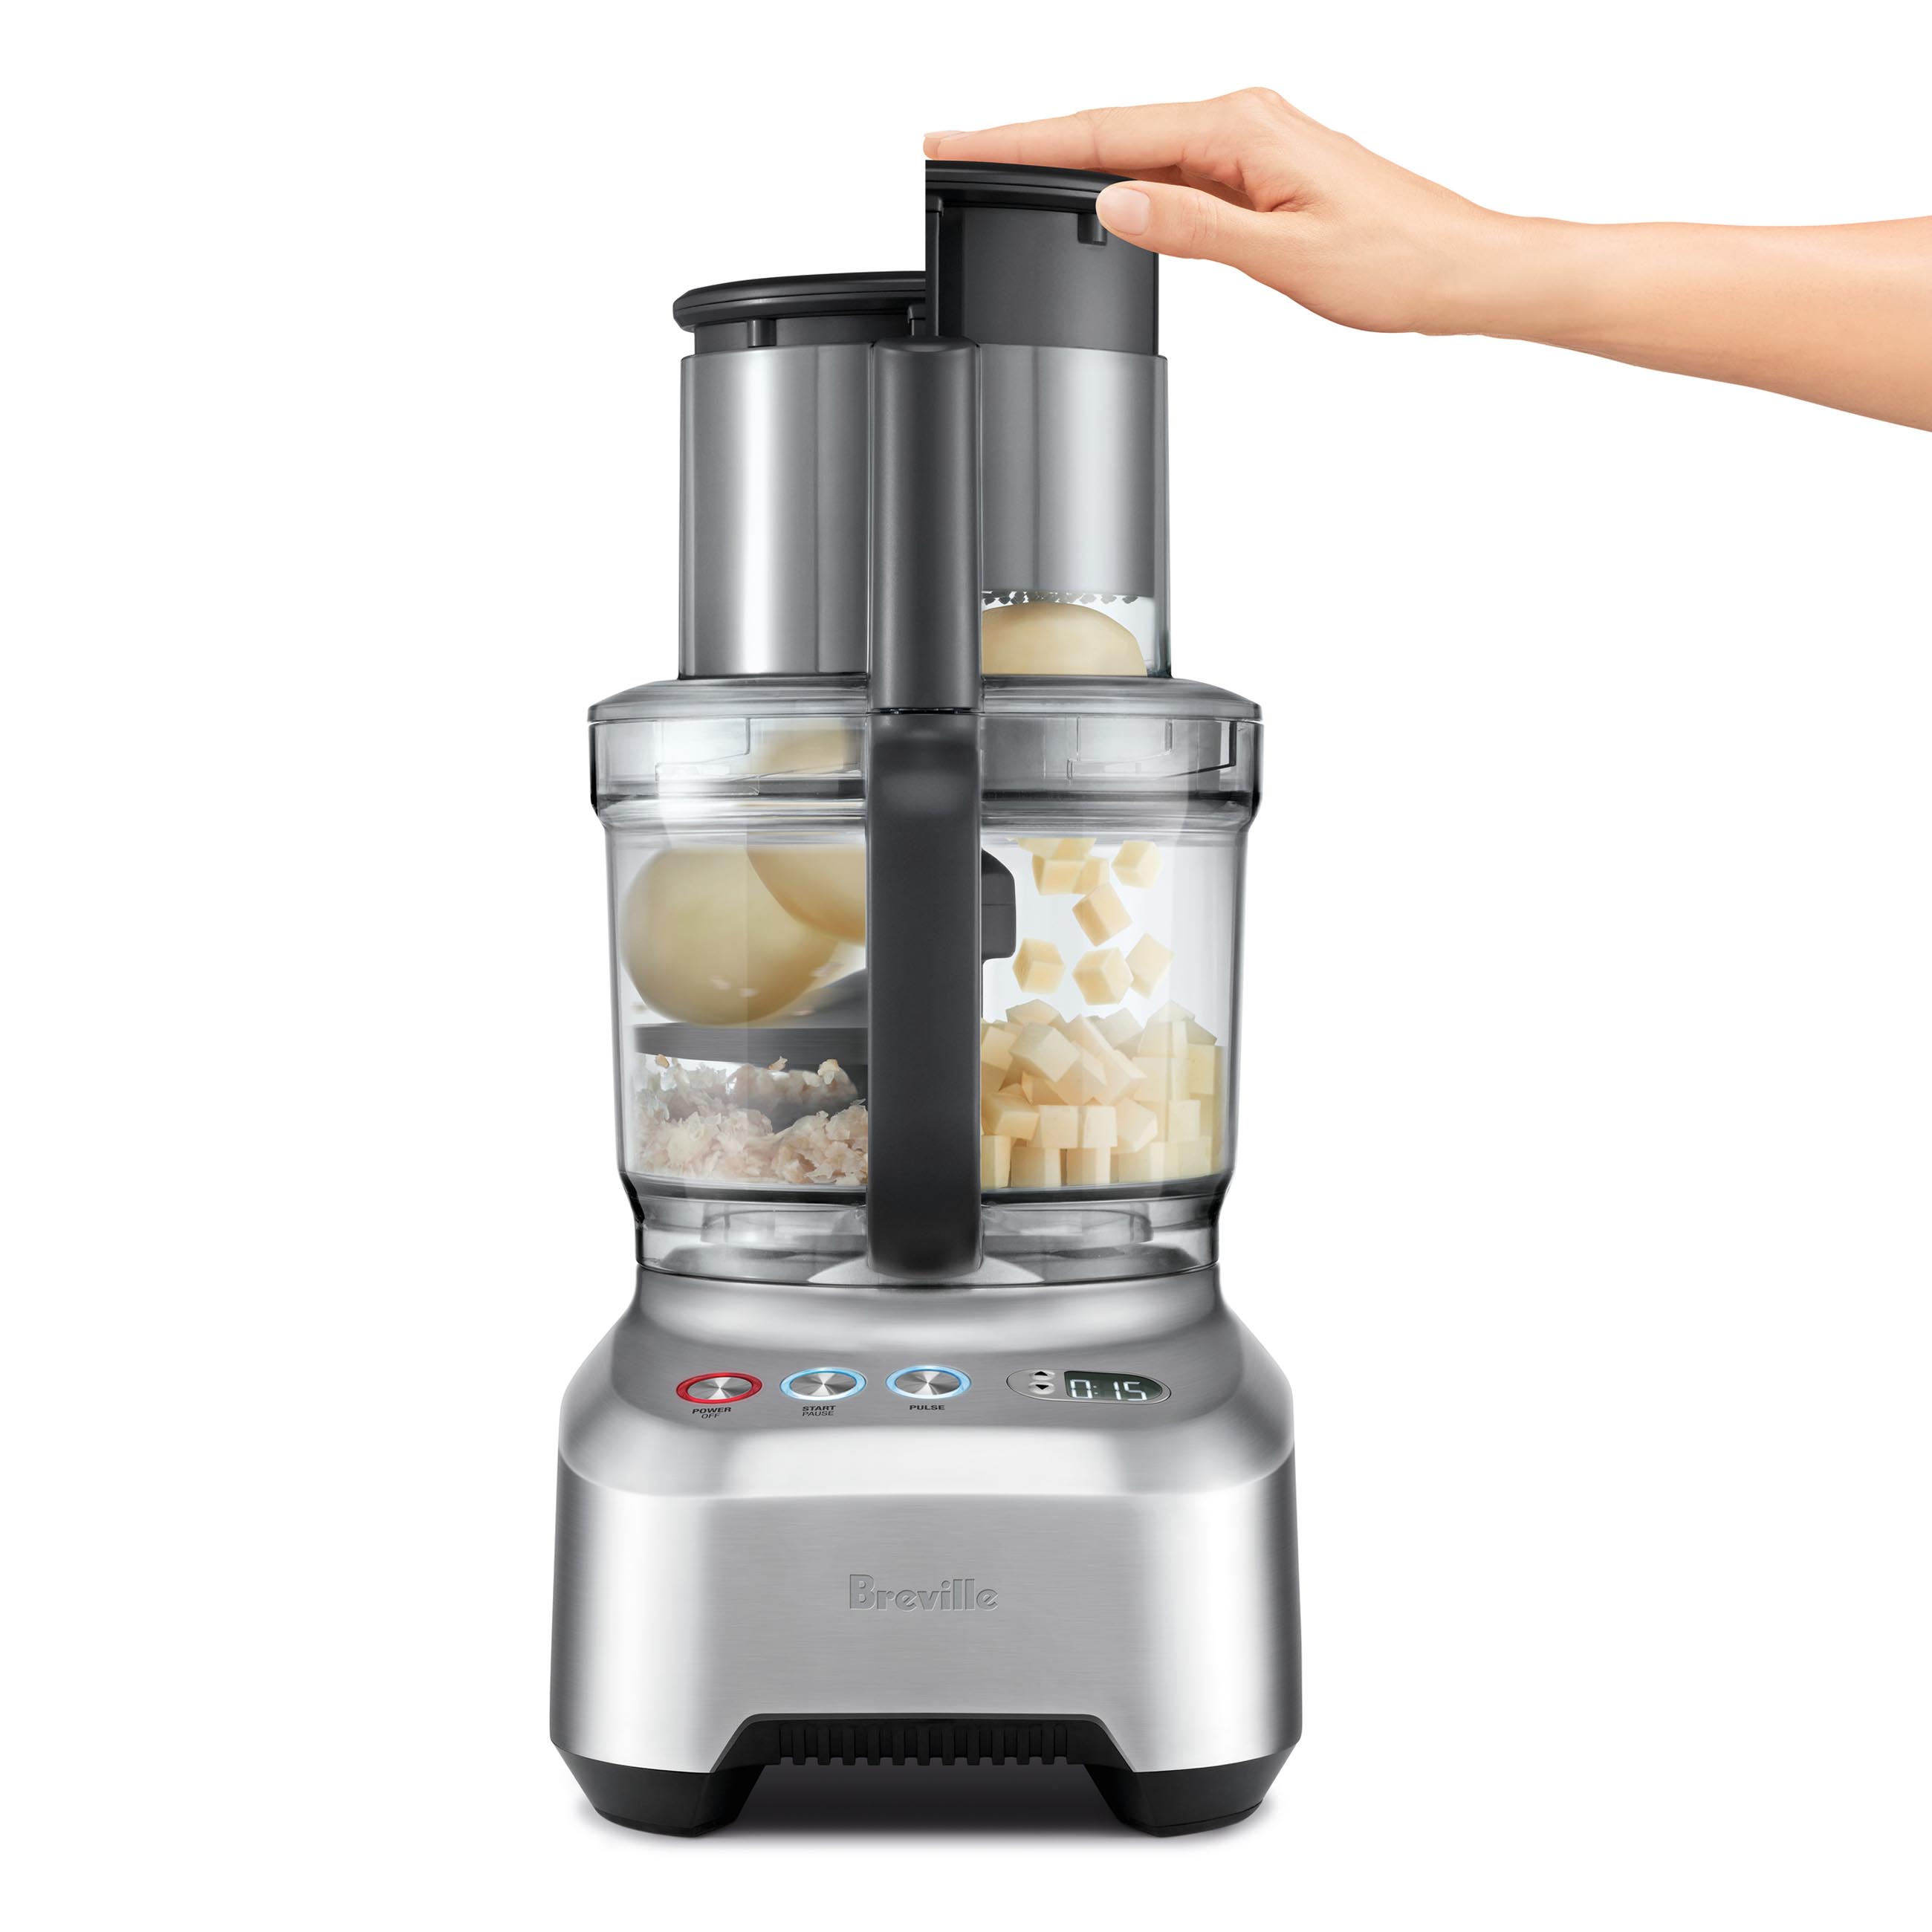  the Kitchen Wizz™ 15 Pro Food Processors in Brushed Aluminium heavy duty induction motor